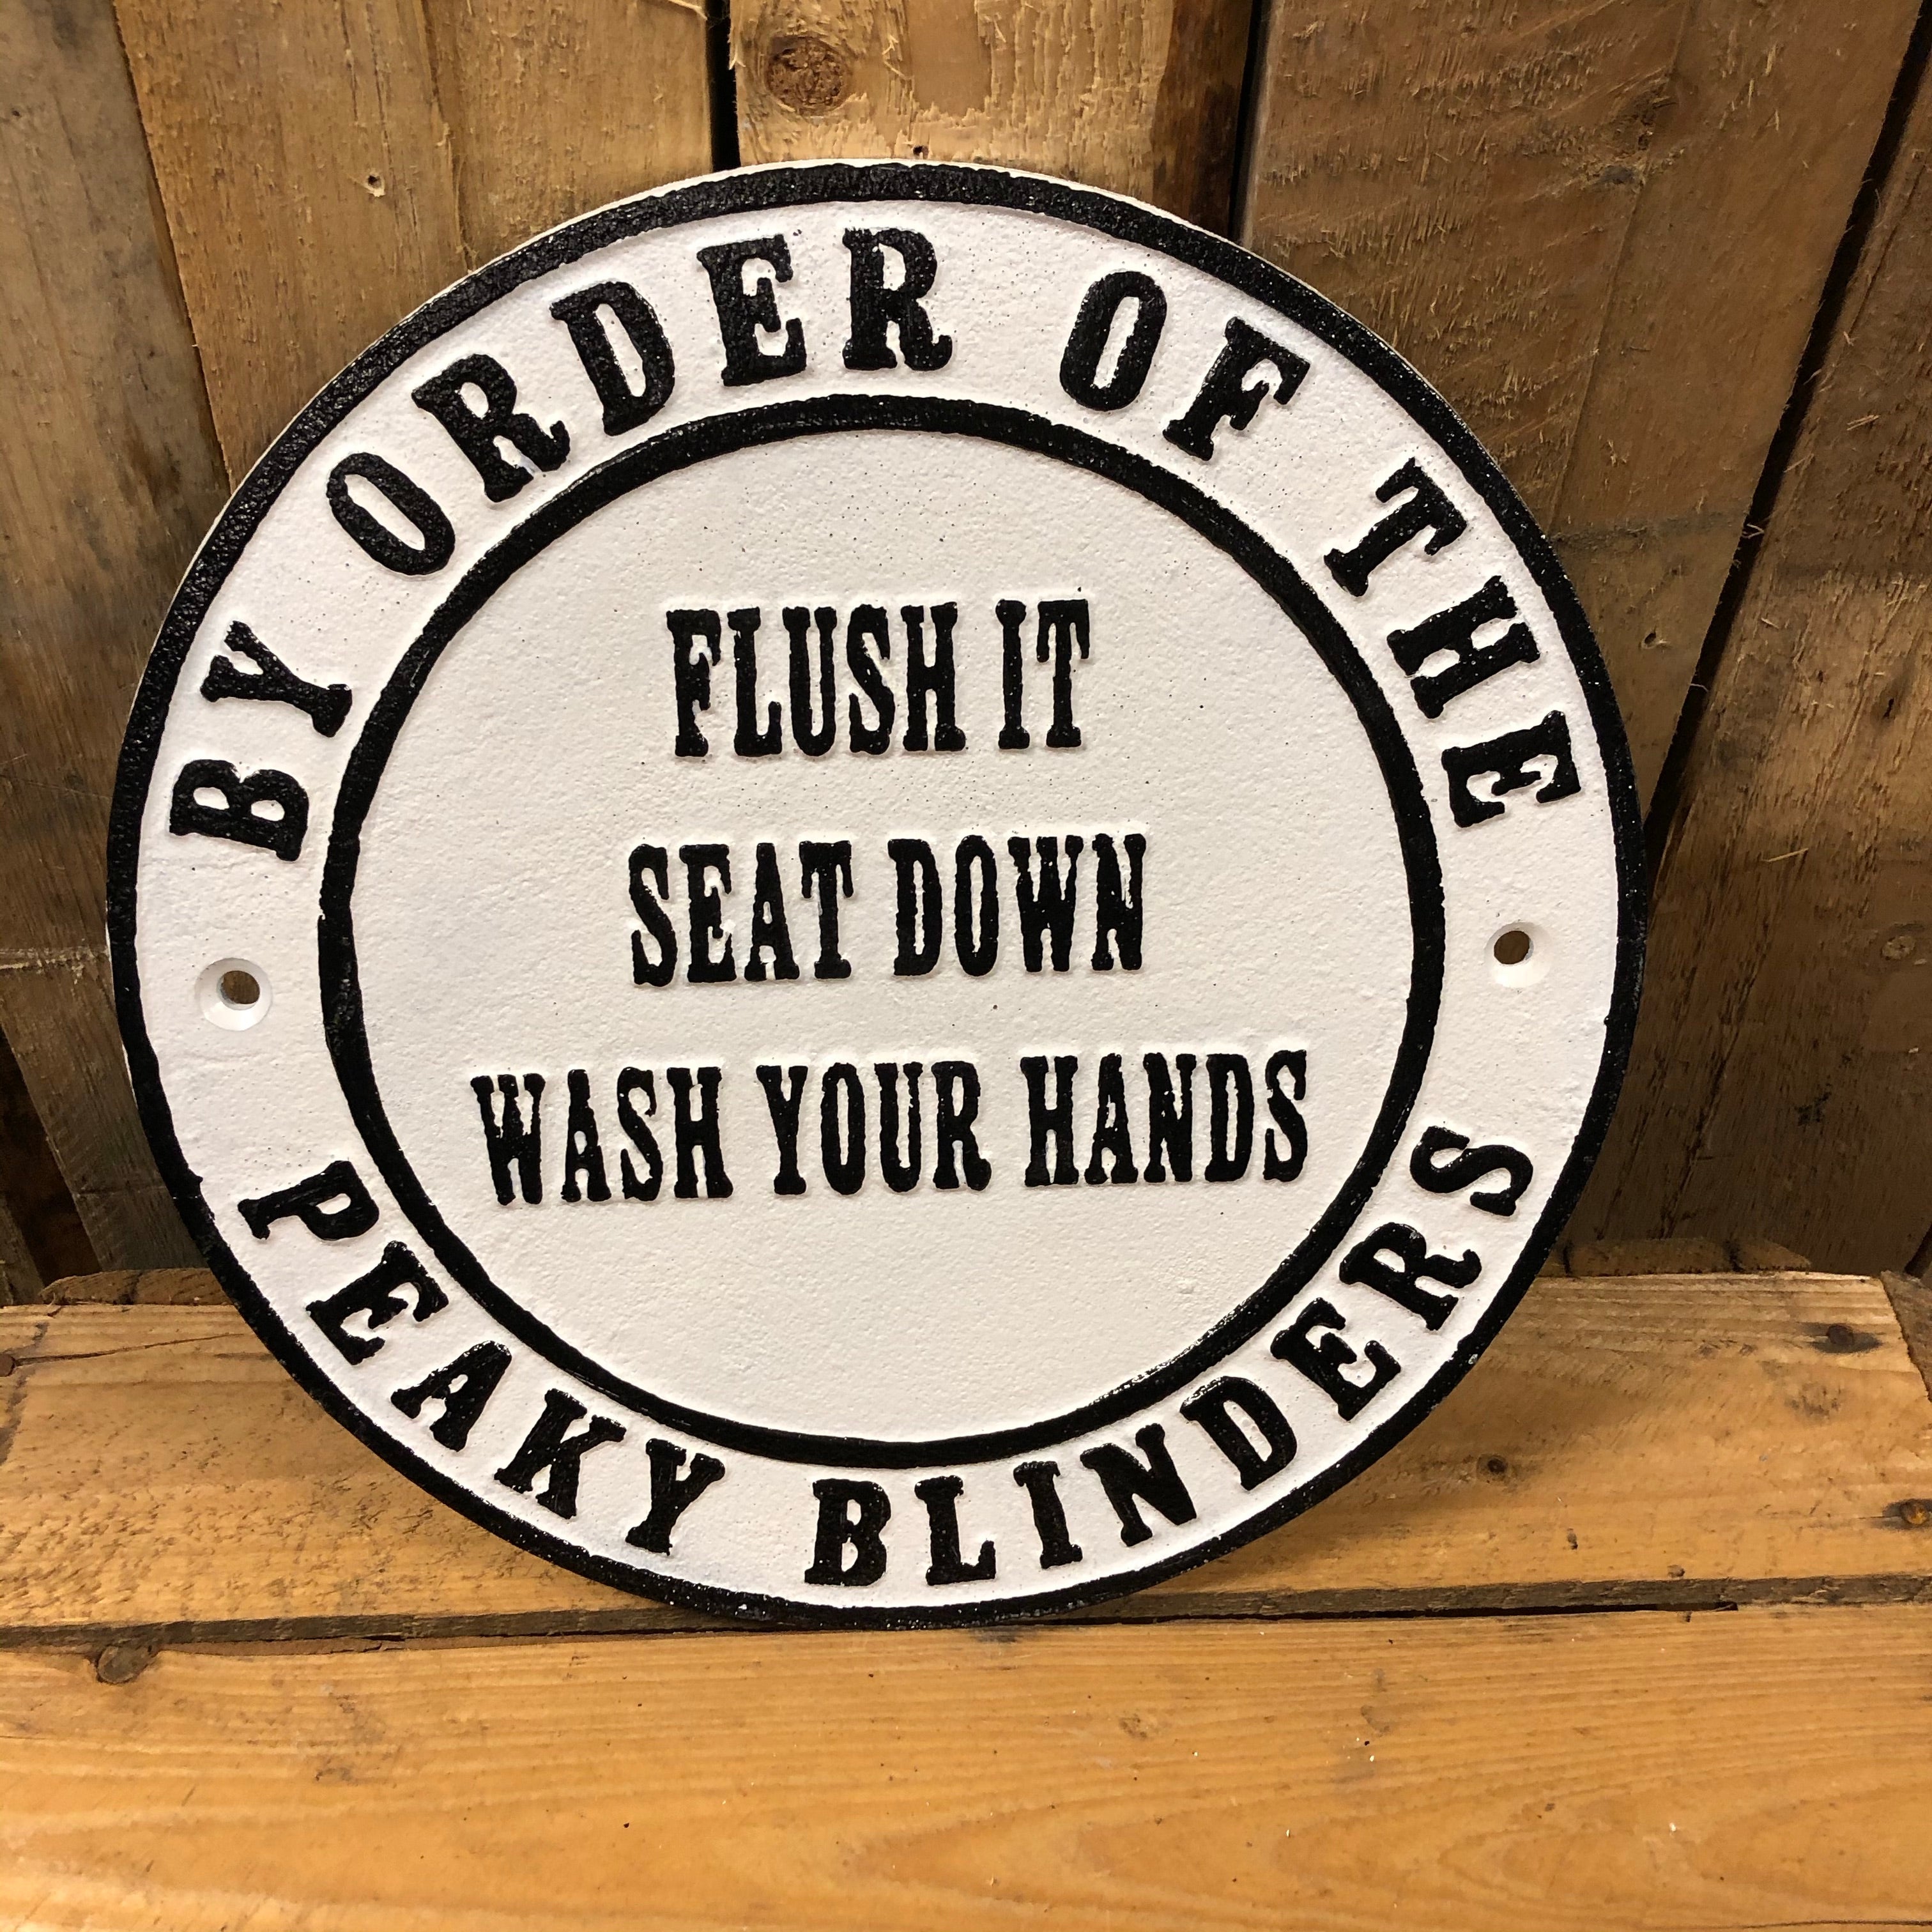 Peaky blinders heavy cast iron sign Flush it seat down  - SALE